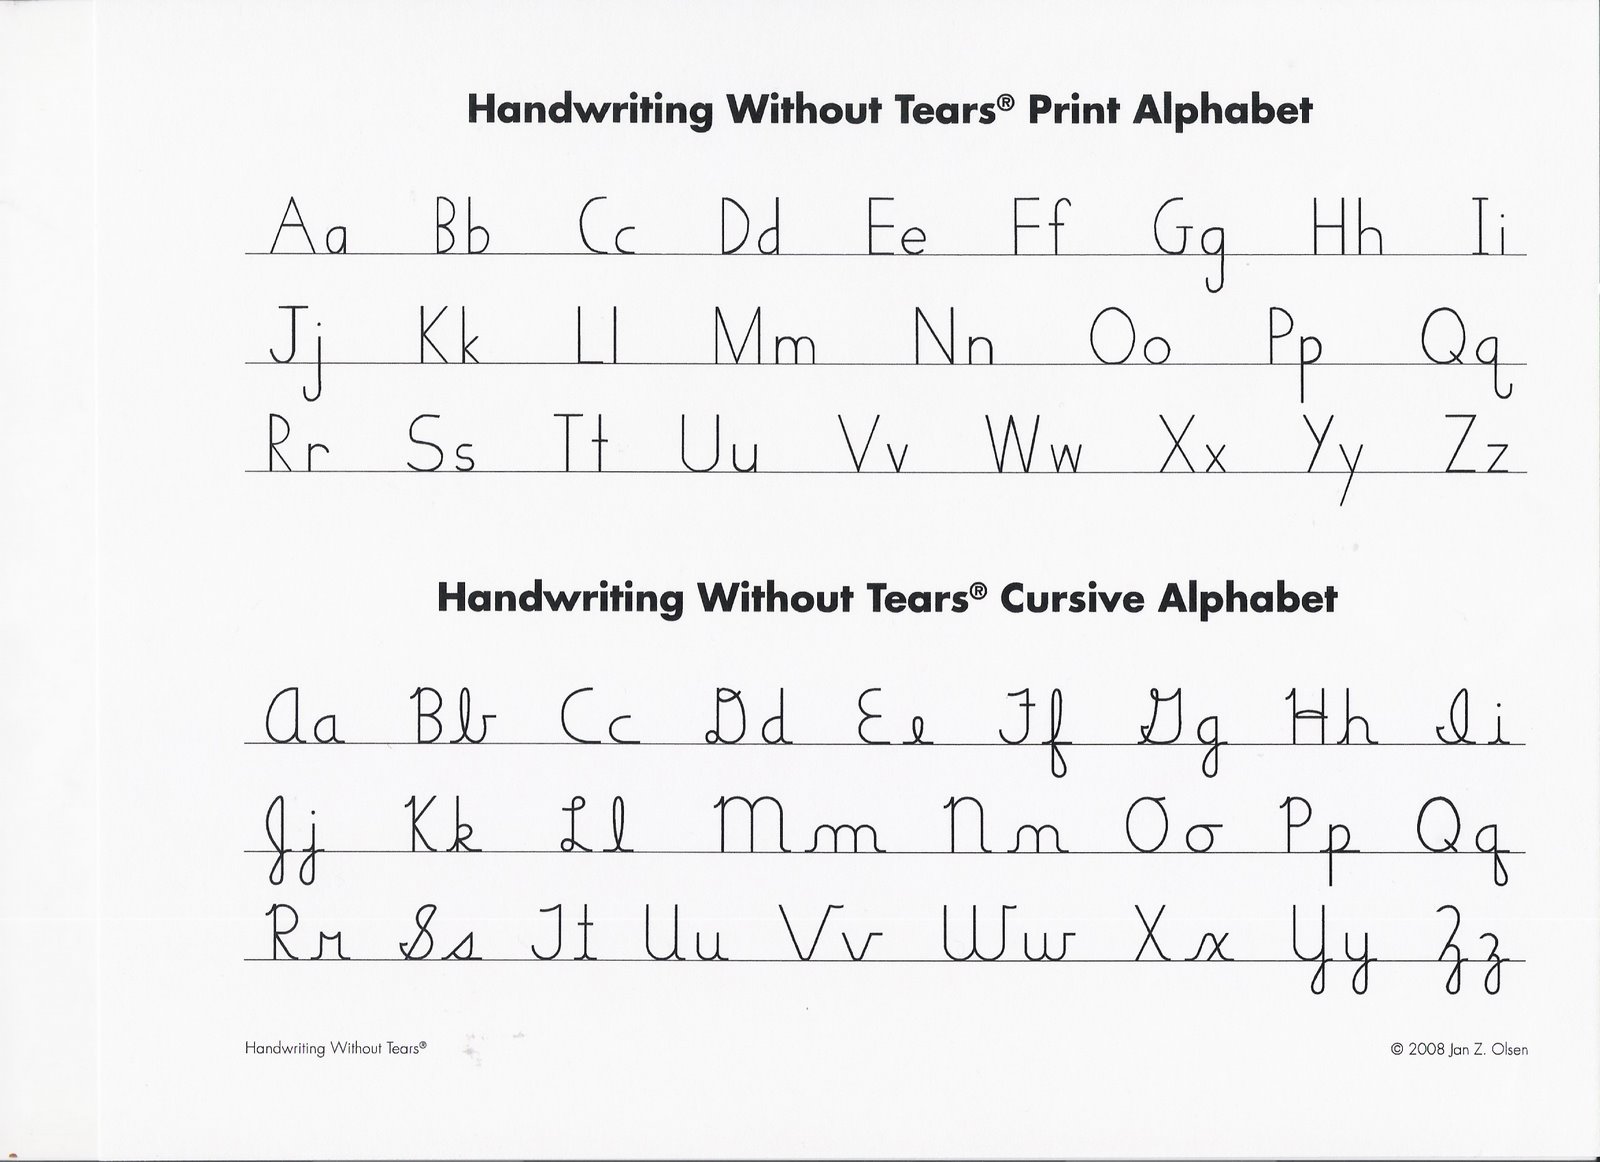 printables-handwriting-without-tears-cursive-worksheets-gotaplet